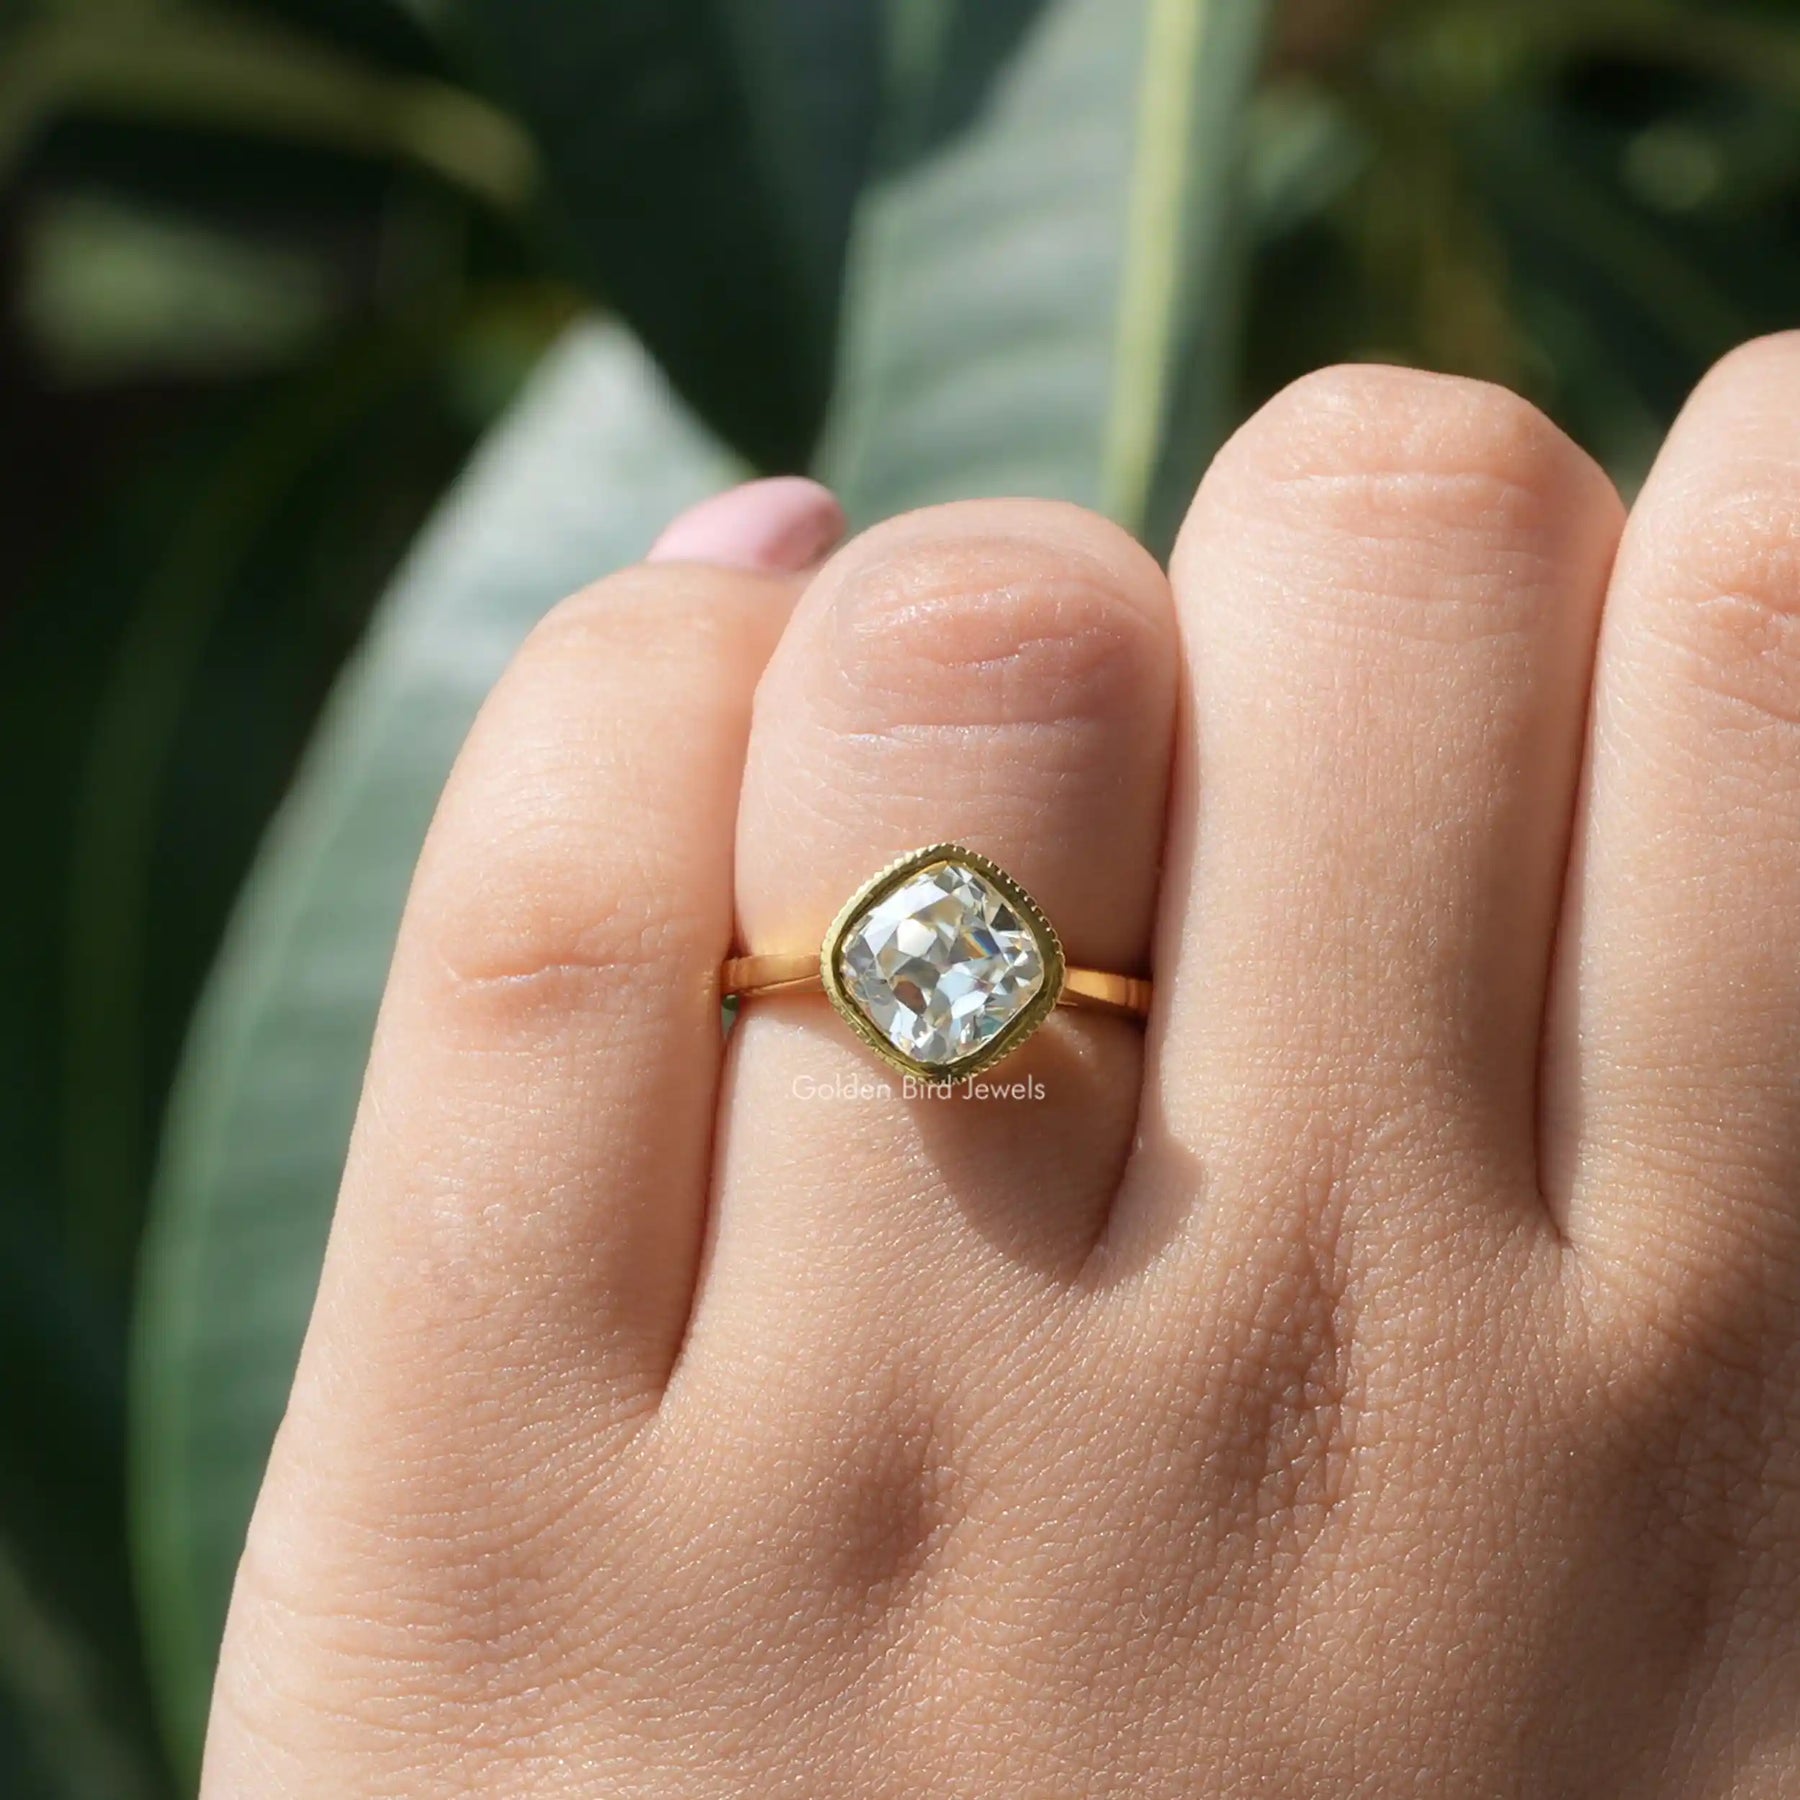 [This old mine cushion cut solitaire engagement ring in 14k yellow gold]-[Golden Bird Jewels]